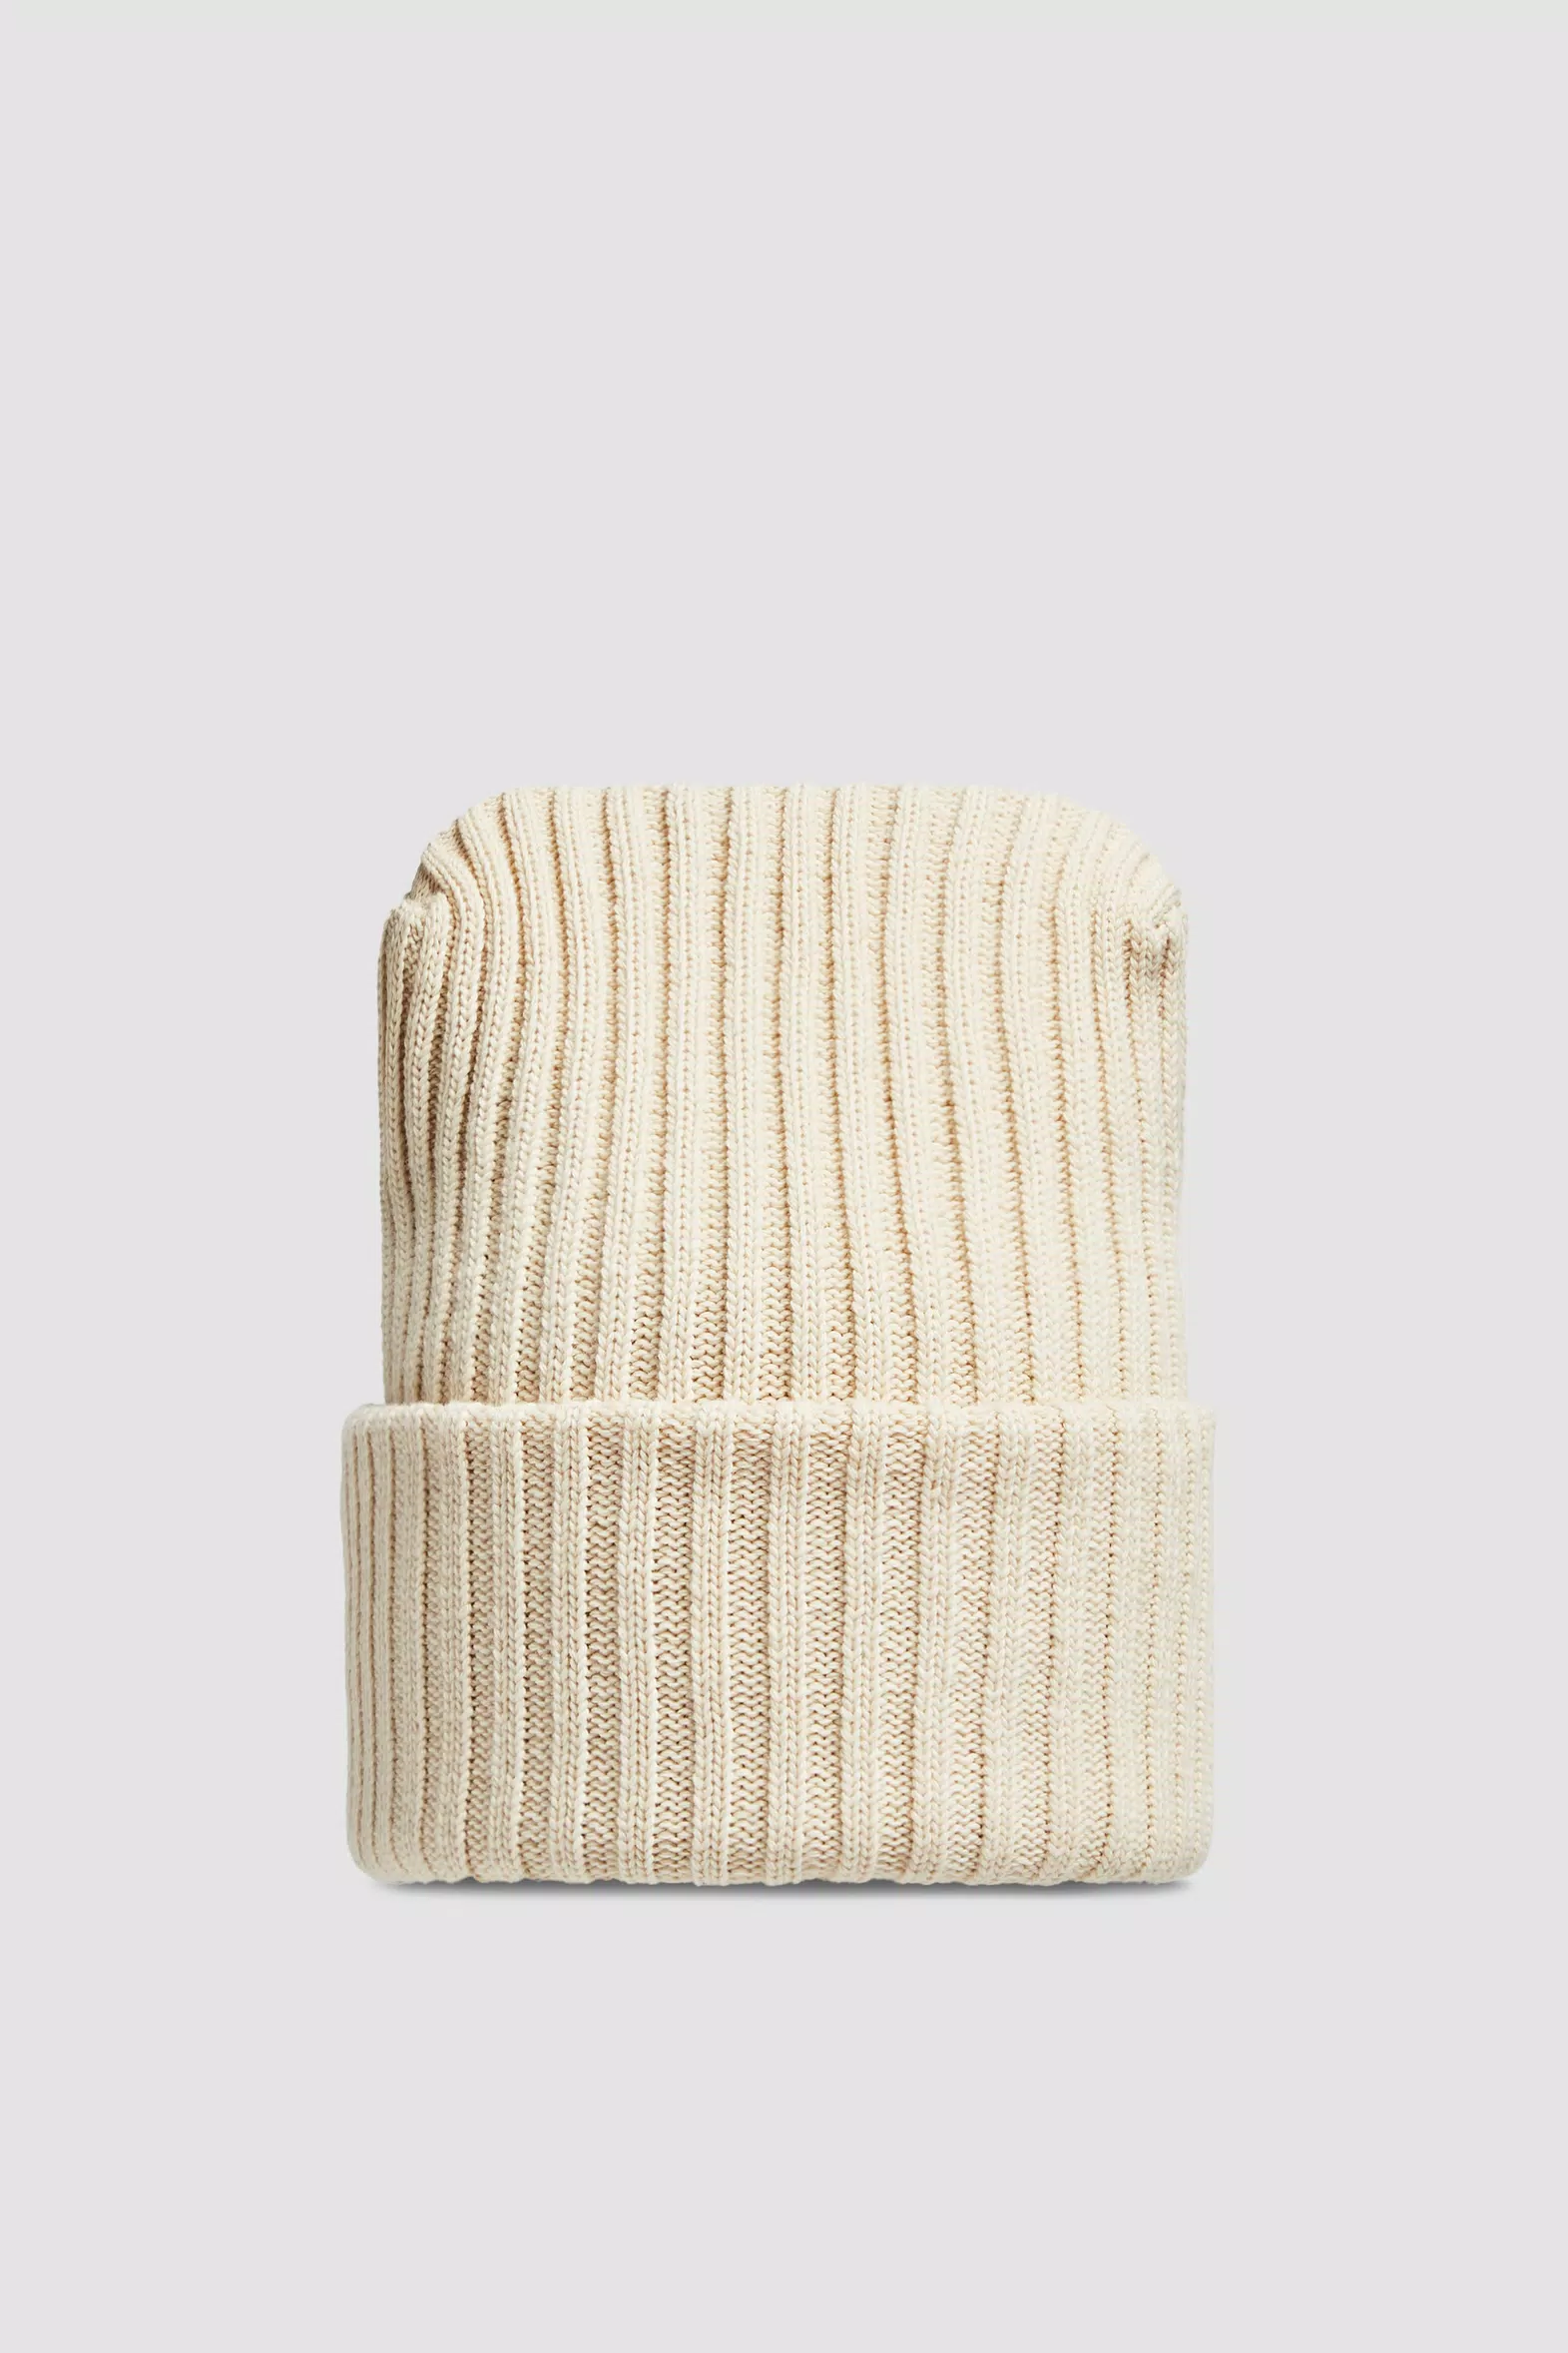 White Wool Beanie - Moncler x Roc Nation designed by Jay-Z for Genius ...